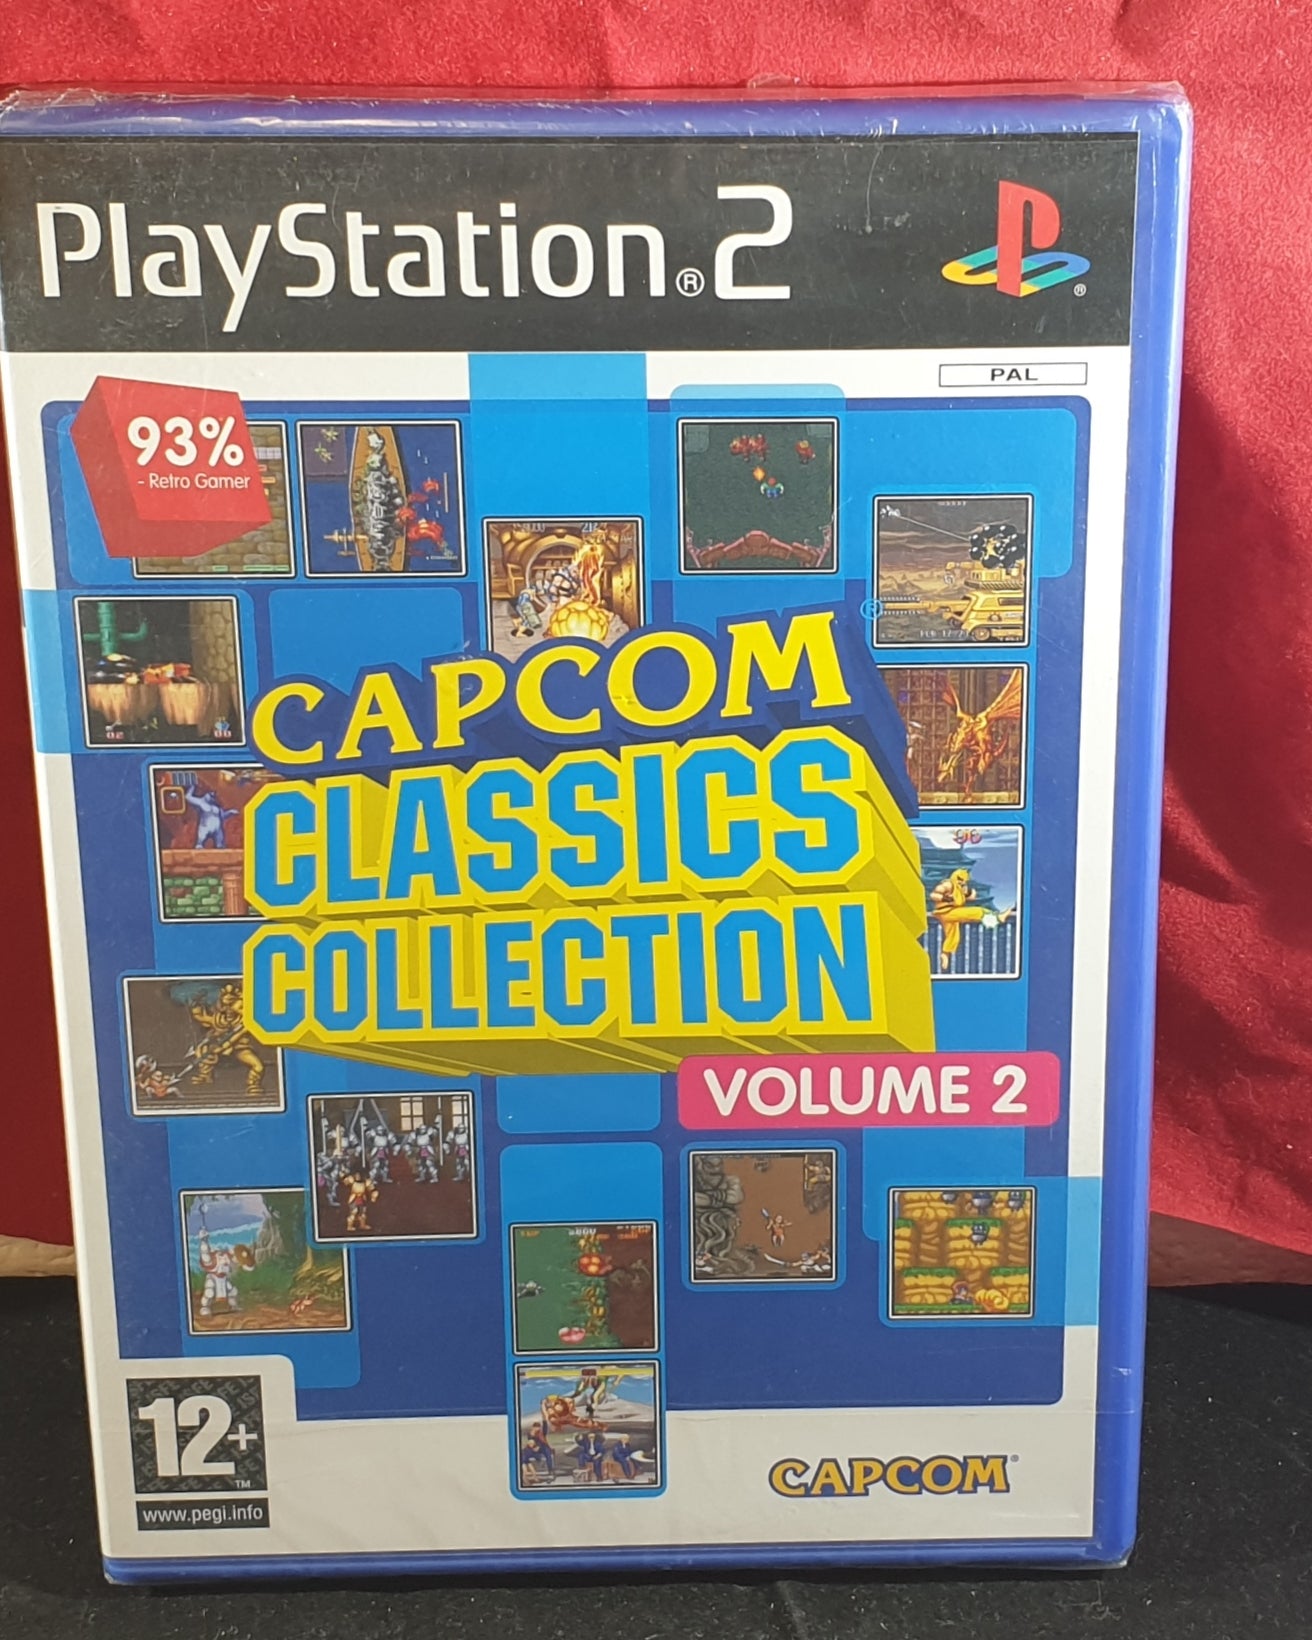 Brand New and Sealed Capcom Classics Collection Volume 2 Sony Playstation 2 (PS2) Game